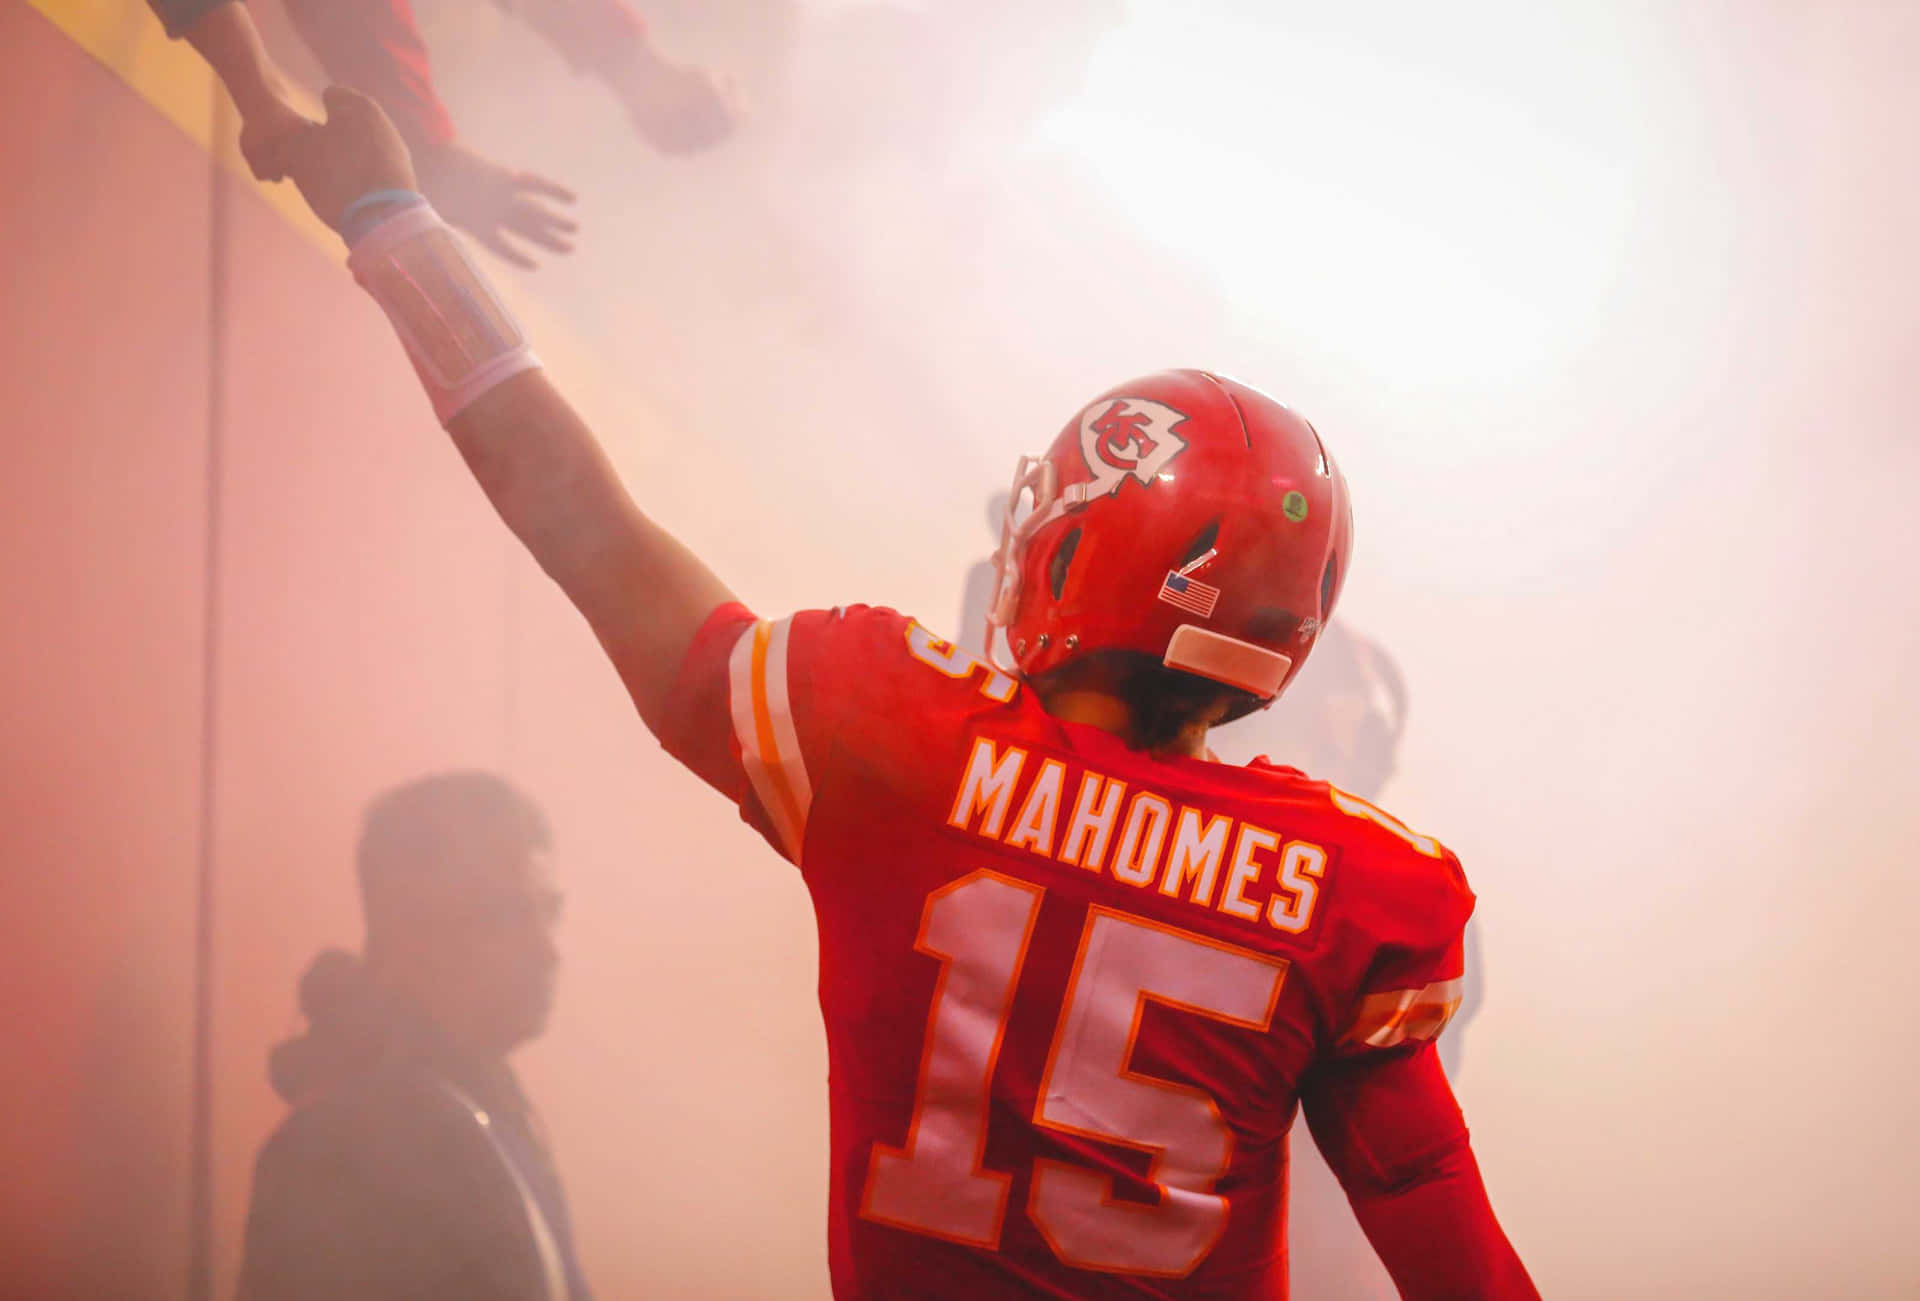 Caption: Patrick Mahomes in Action